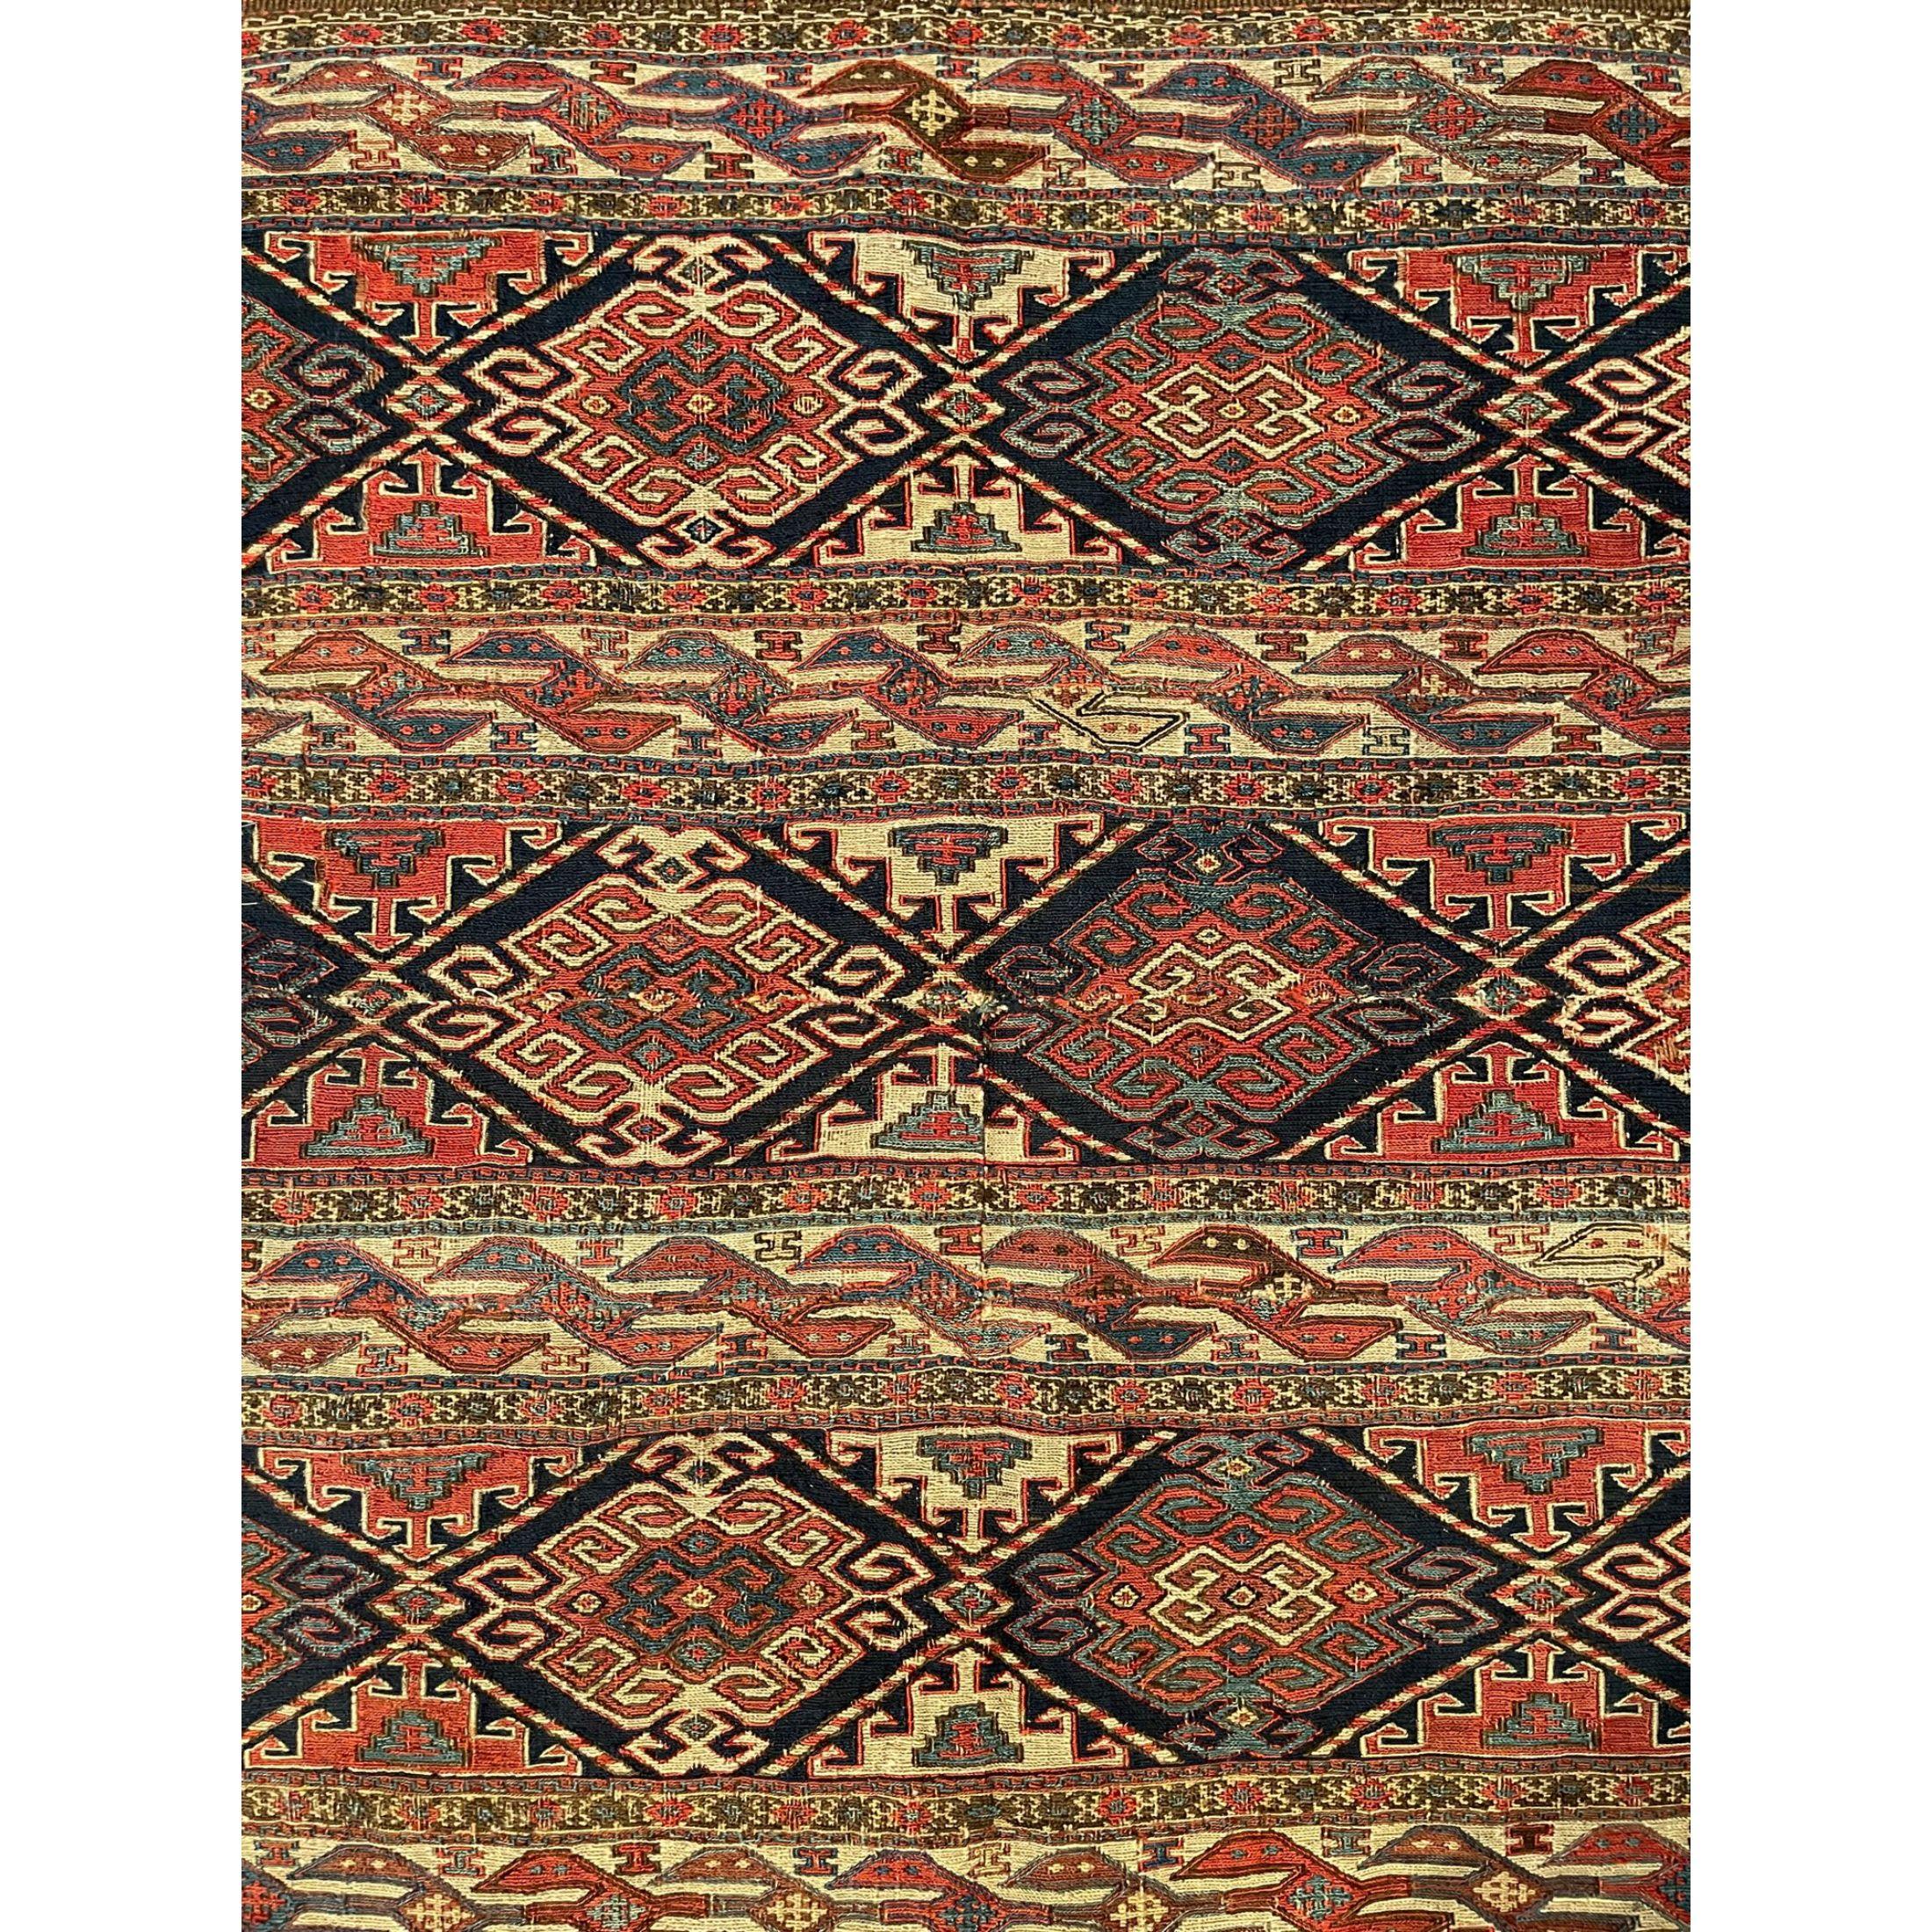 Shahsavan Rugs – Highly unusual and exciting, antique Shahsavan or Shahsevan area rugs and carpets have only recently been recognized as a distinct style of Persian rug. Uniquely, Shahsavan rugs and carpets were woven in an area of Persia known as